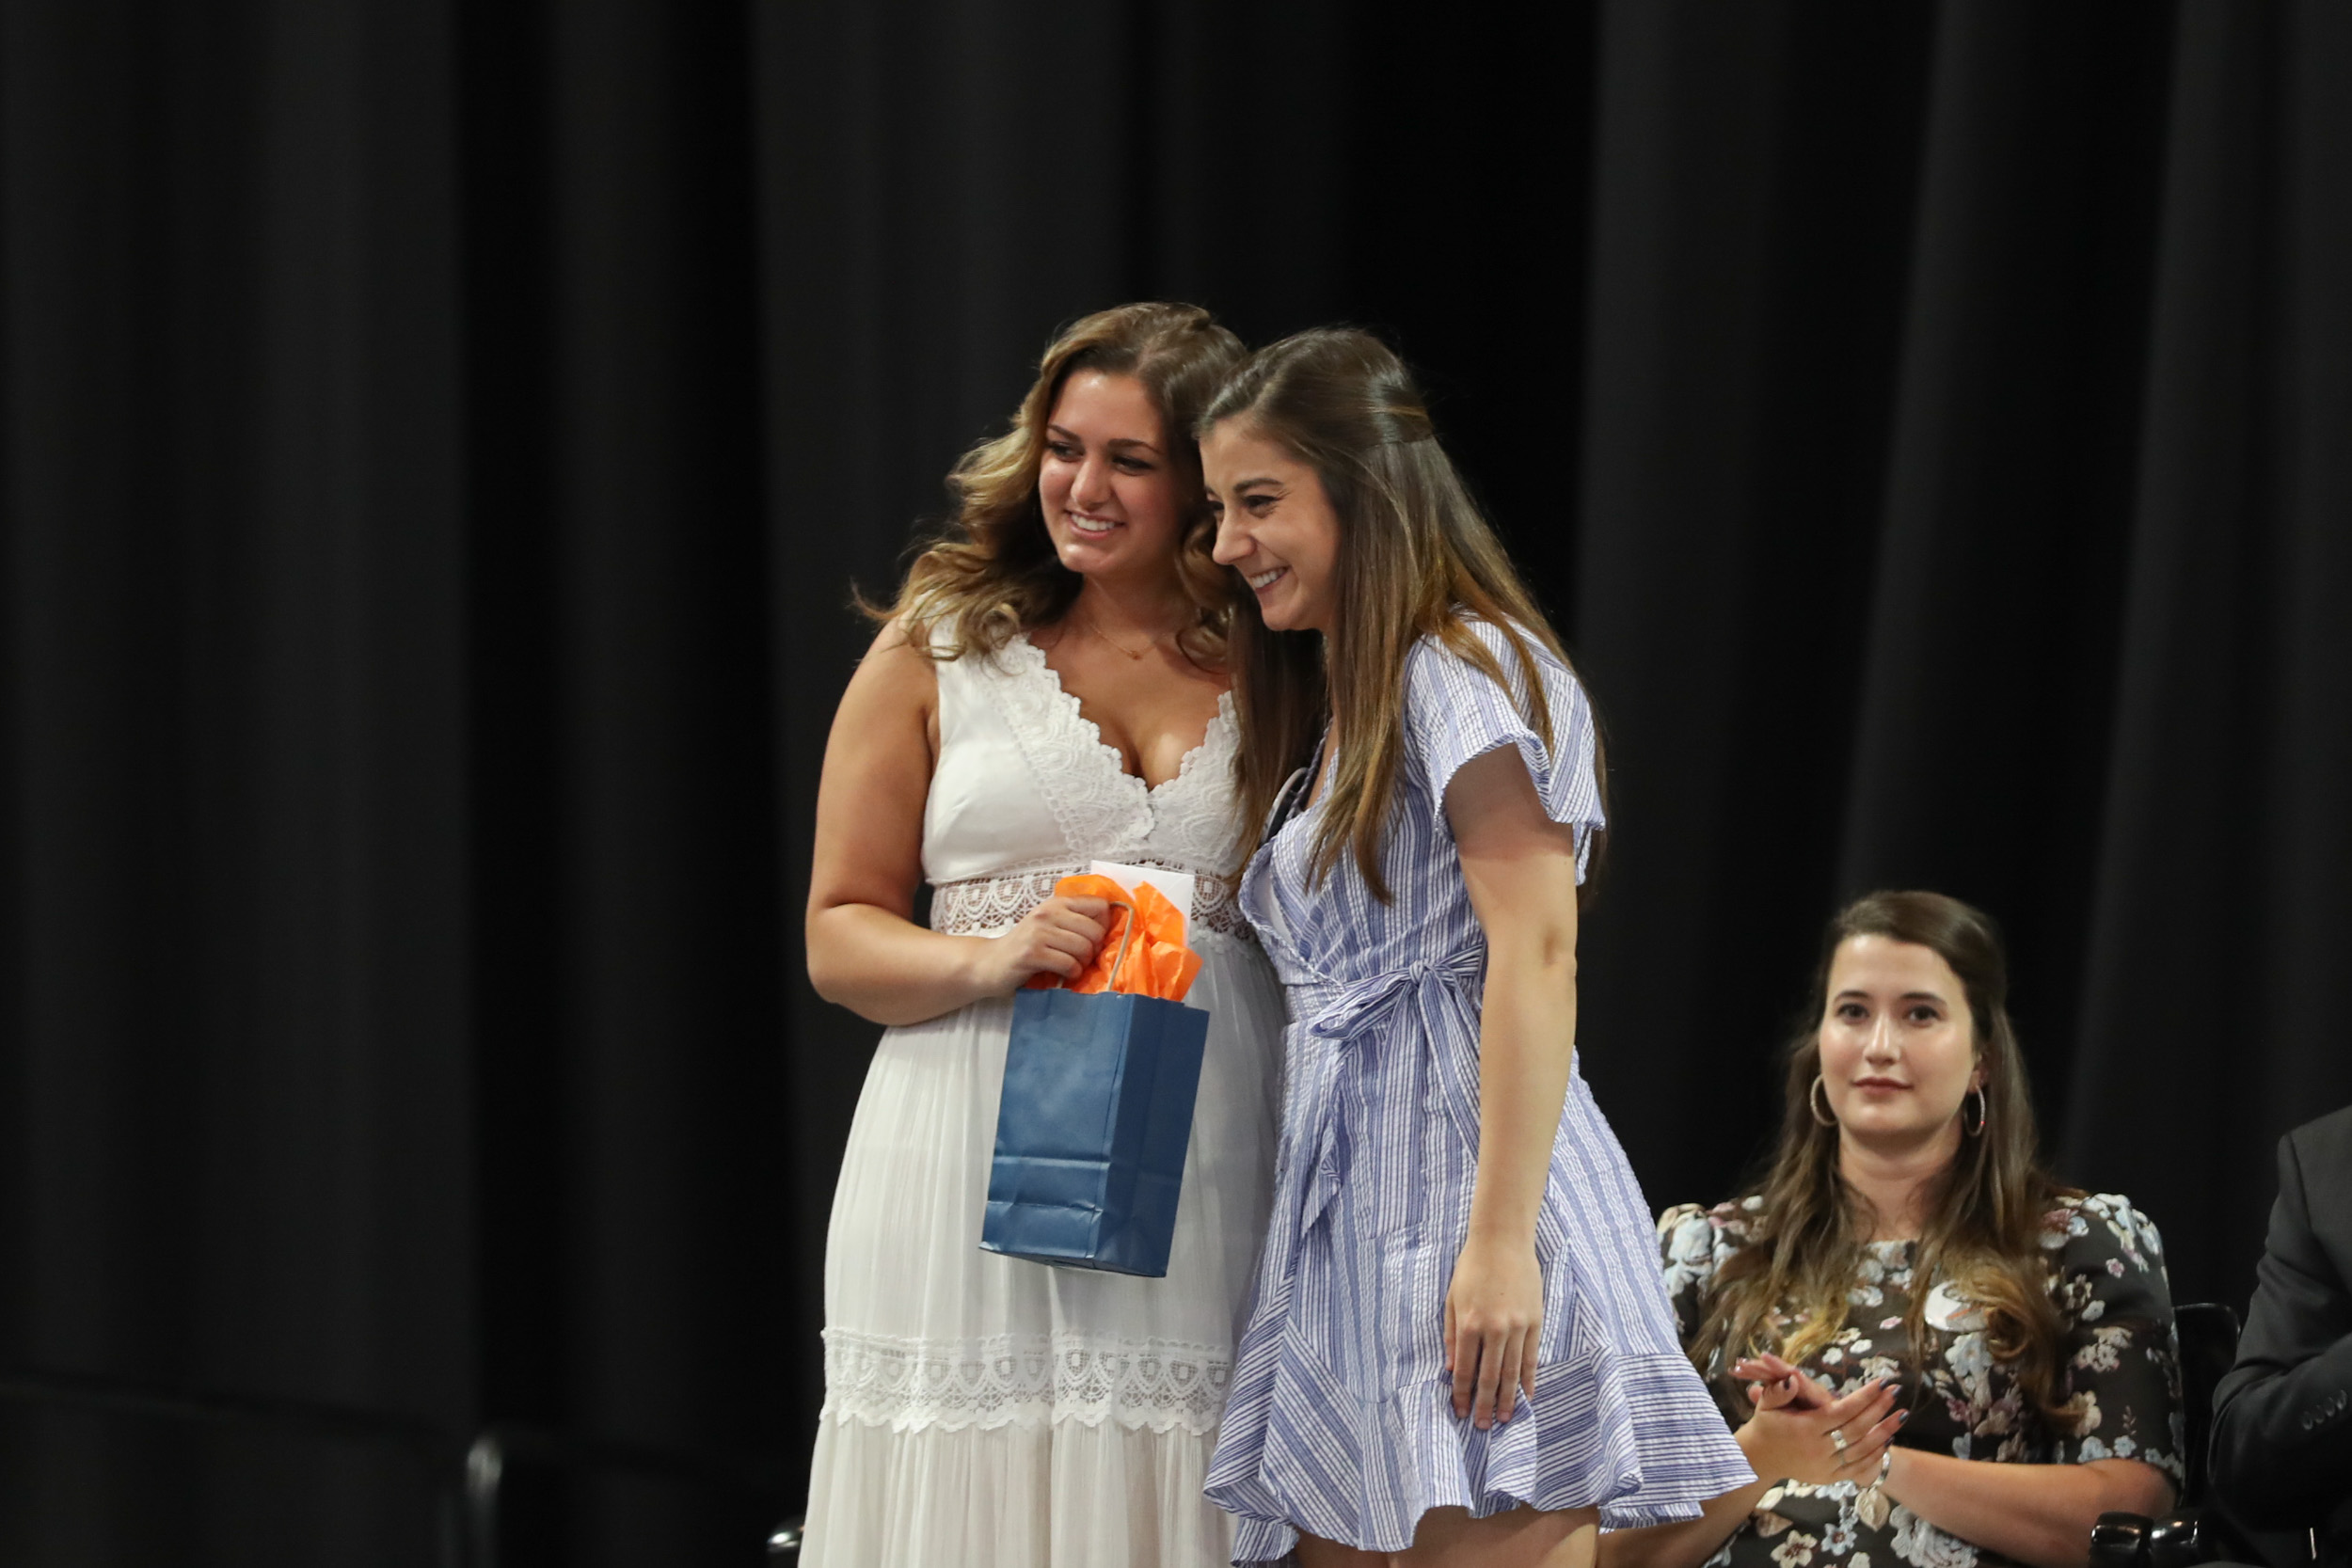 Mariana Brazao, right, and Corinne Singh pose together on stage for a photo